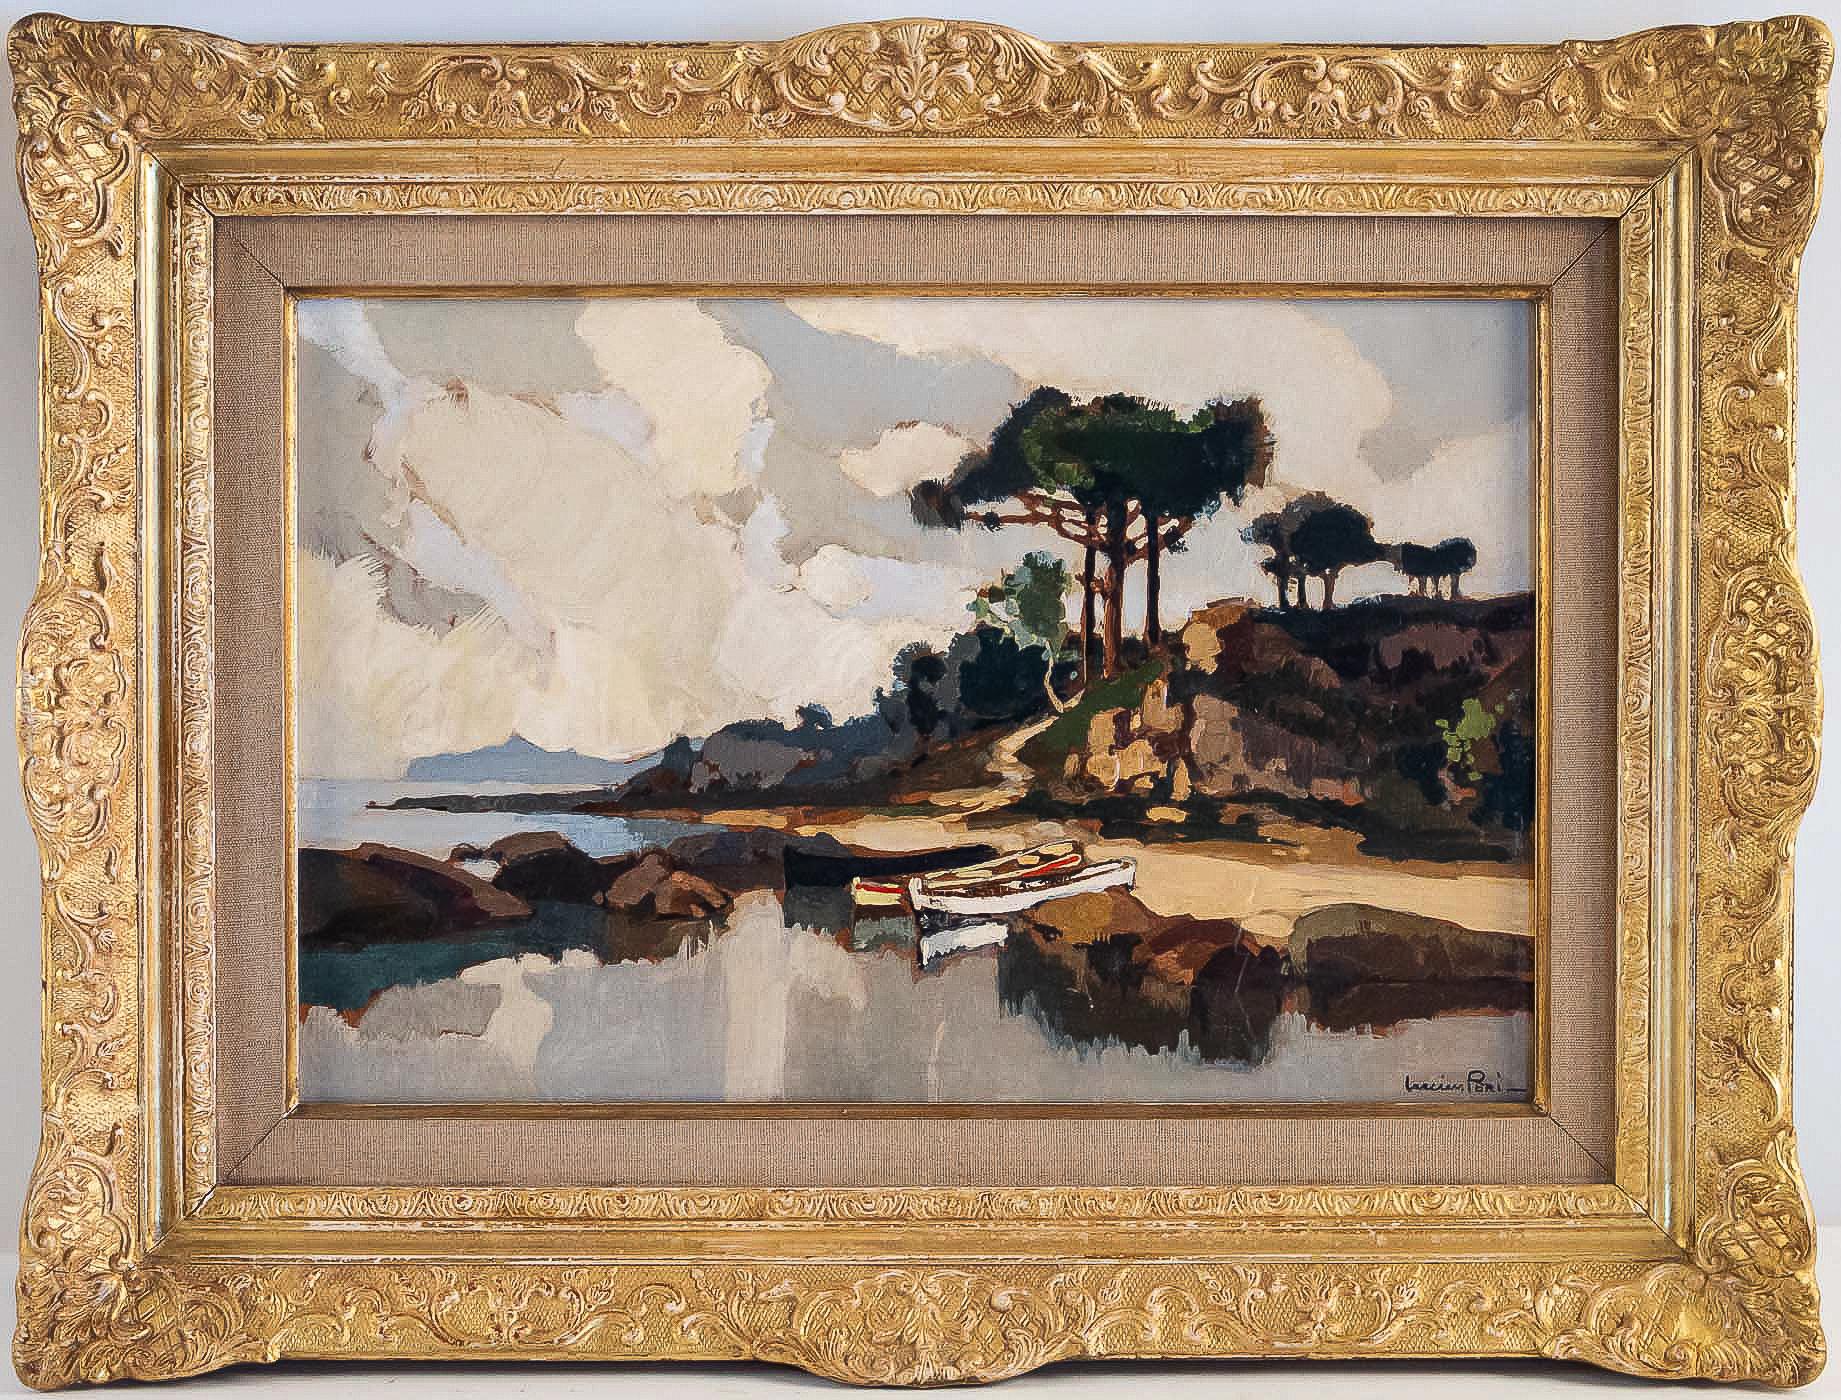 Lucien Péri, oil on panel, boats under Corsican pines, circa 1925-1935

It is rare to be able to find on the market art paintings of this well-known Corsica painter, of the Ajaccio School.
We are pleased to share with you this beautiful painting